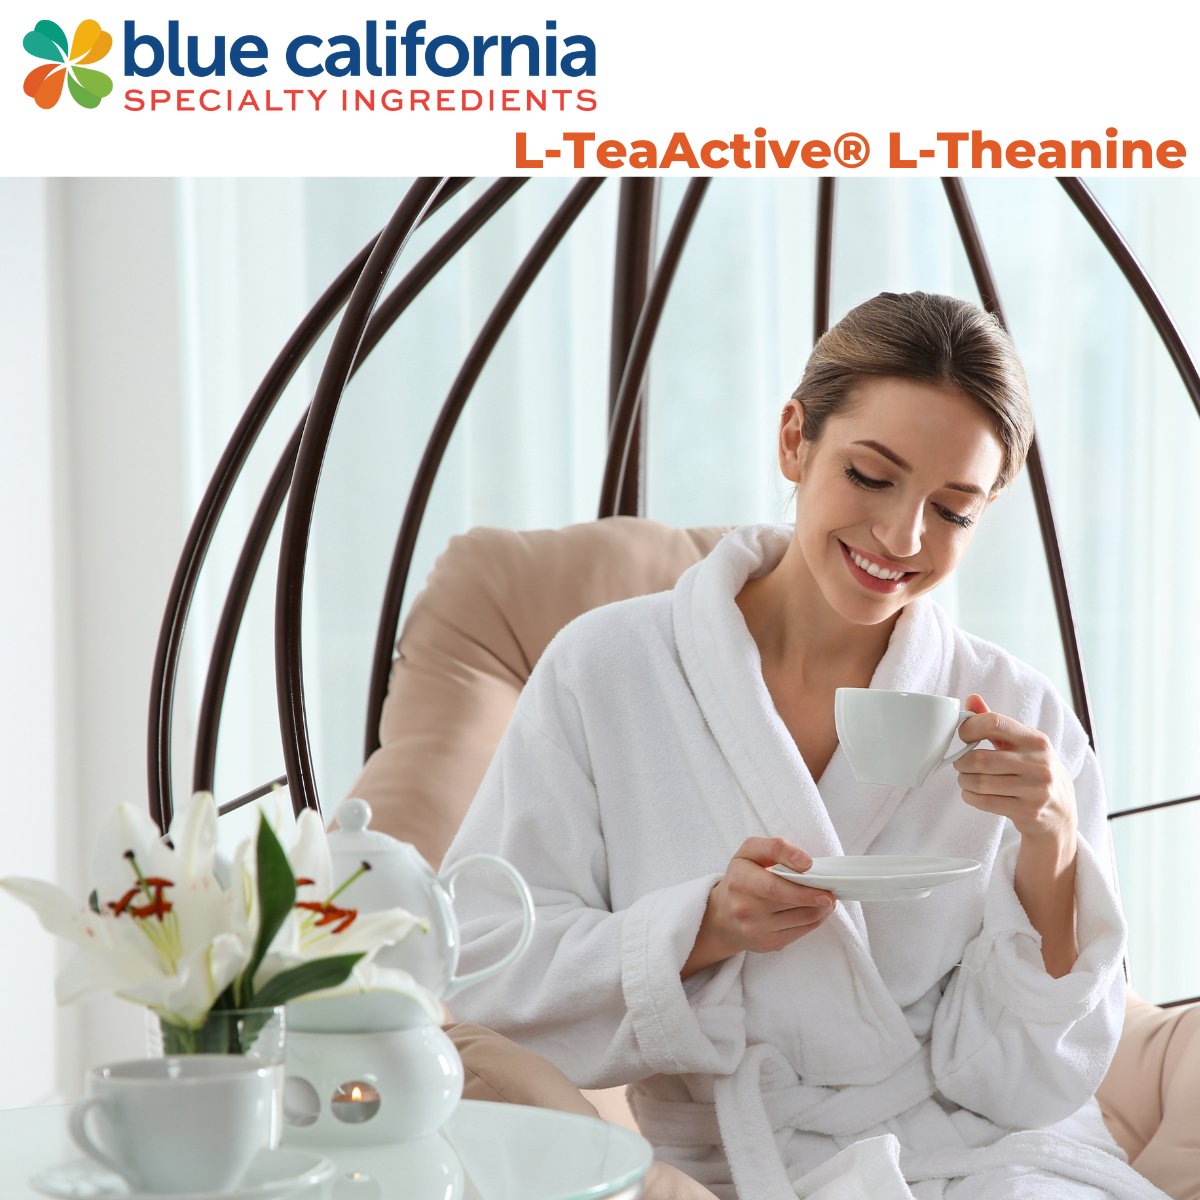 @BlueCal_Ing L-TeaActive #LTheanine is an #aminoacid found in tea leaves that aids in a #healthy stress response by potentially reducing cortisol, the stress hormone in the body, and increasing brain alpha wave activity. #adaptogens